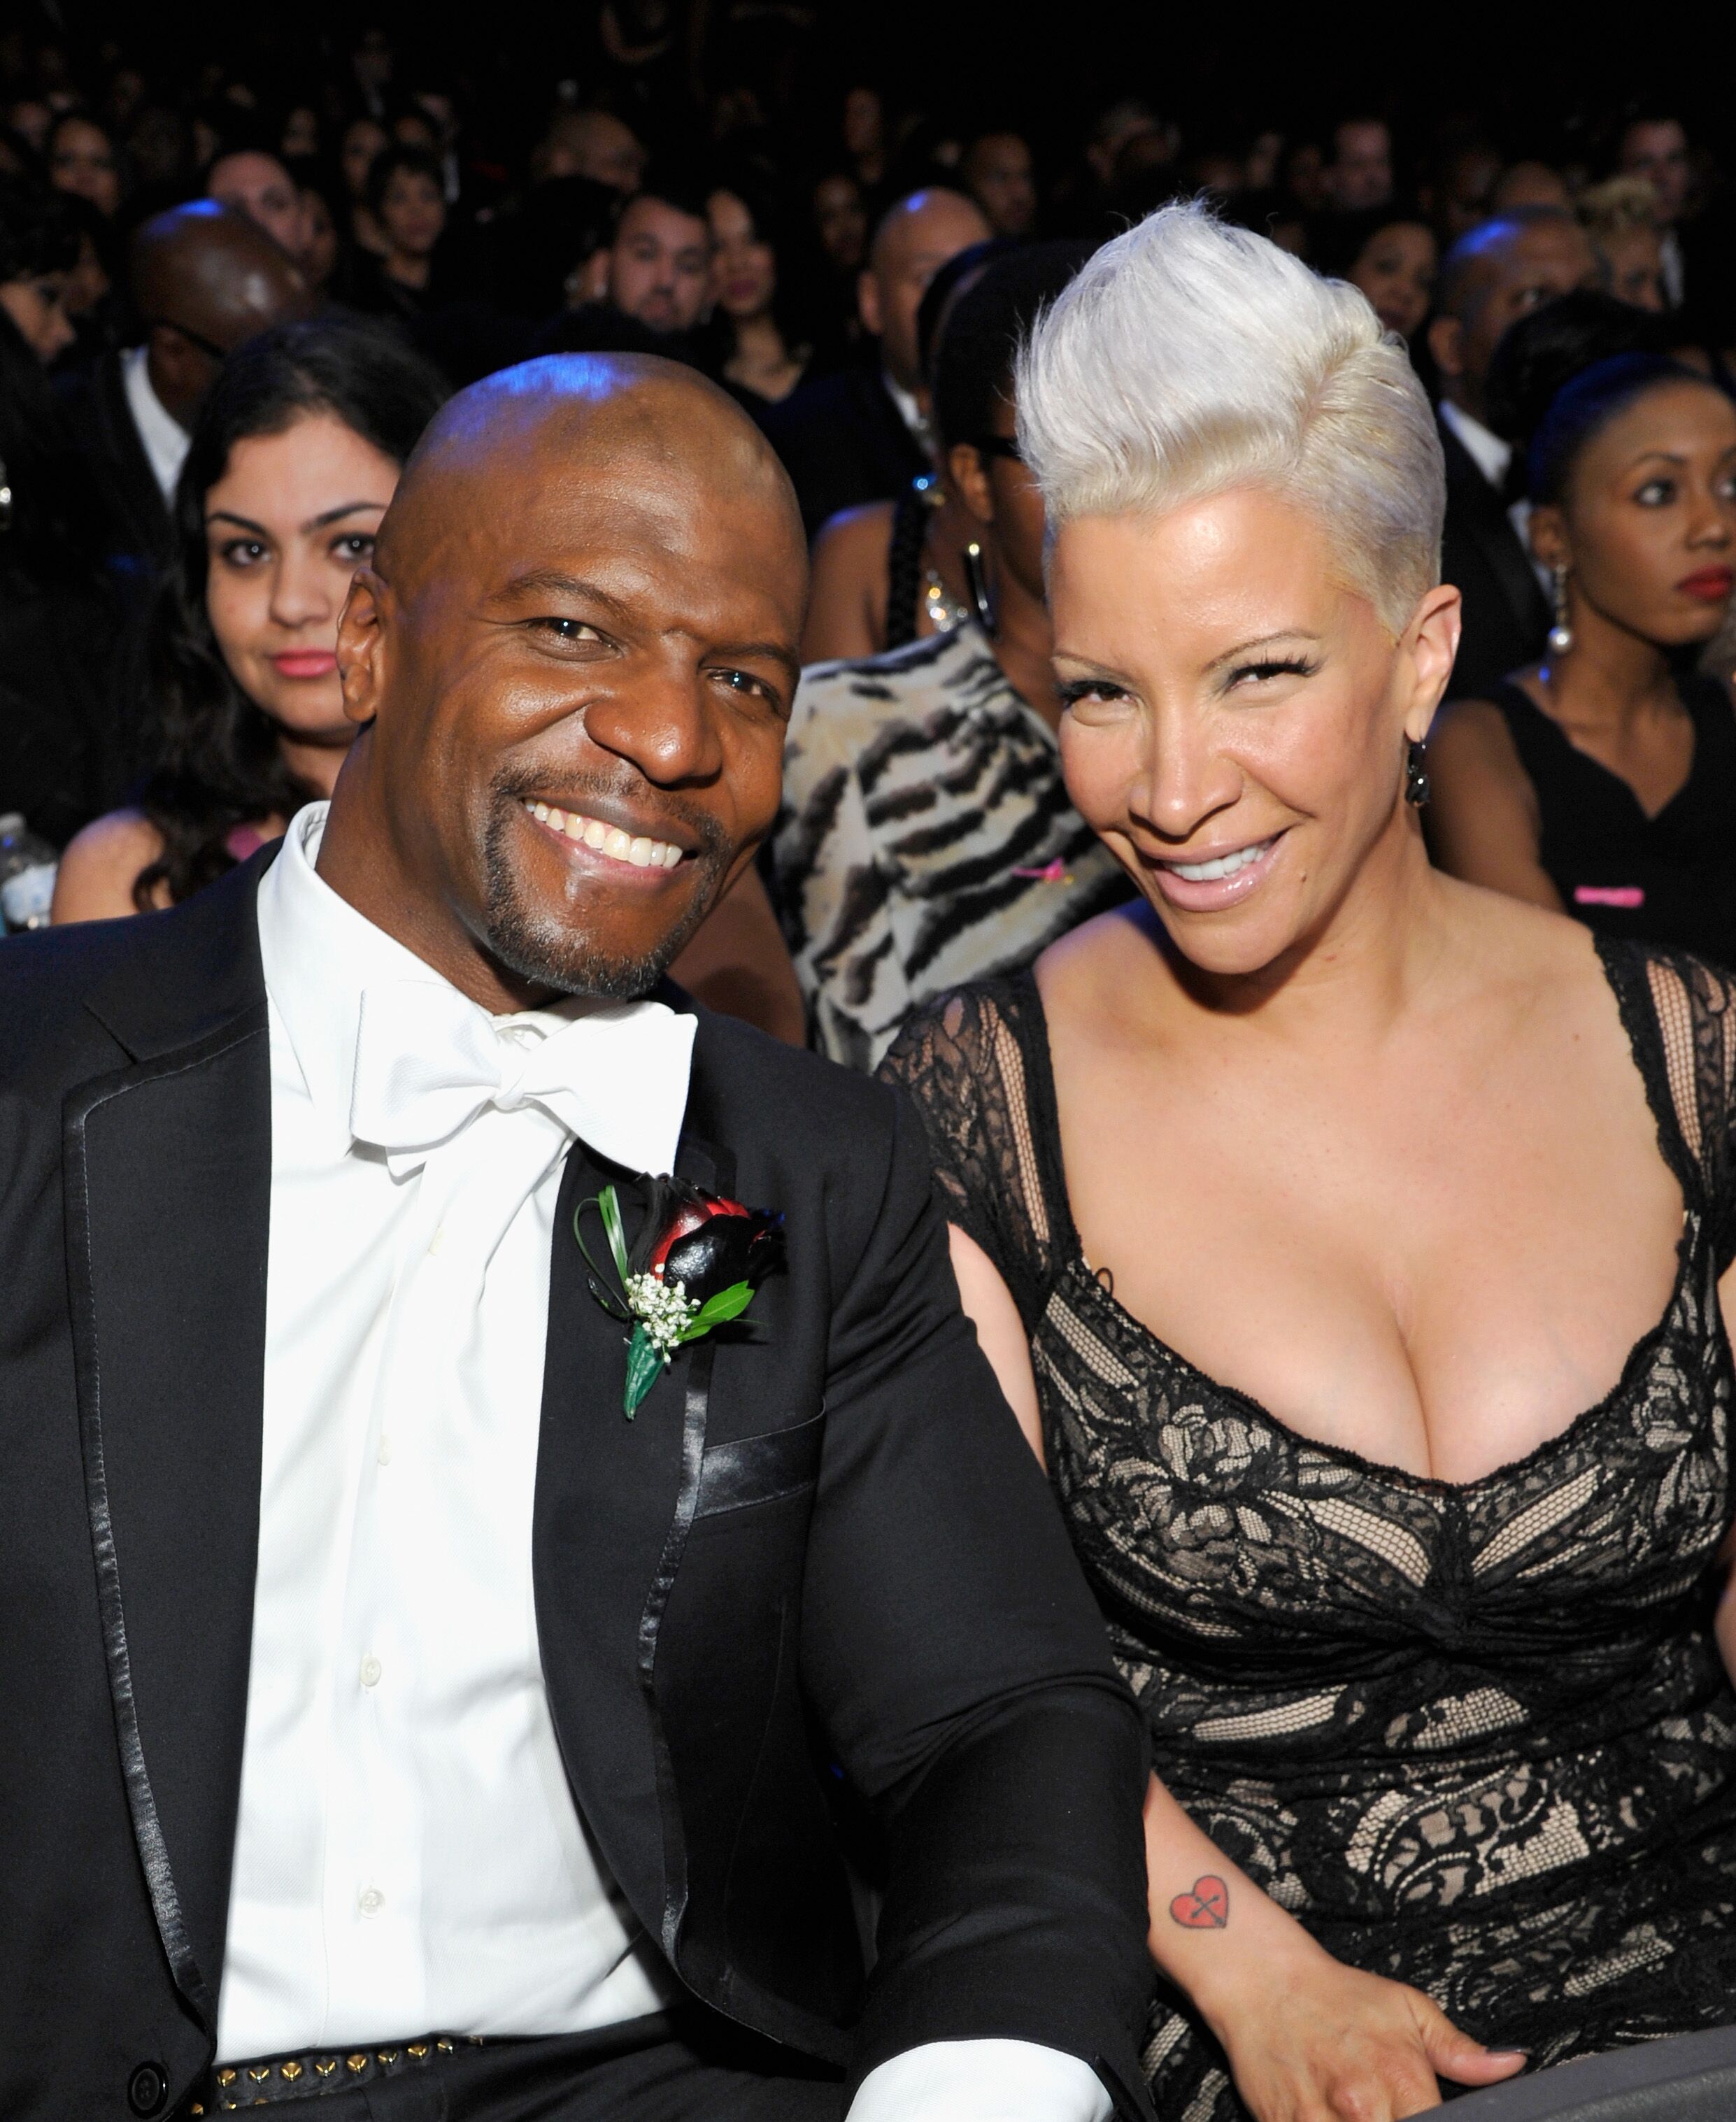  Terry Crews (L) and wife Rebecca King-Crews attends the 45th NAACP Image Awards presented by TV One at Pasadena Civic Auditorium. | Source: Getty Images